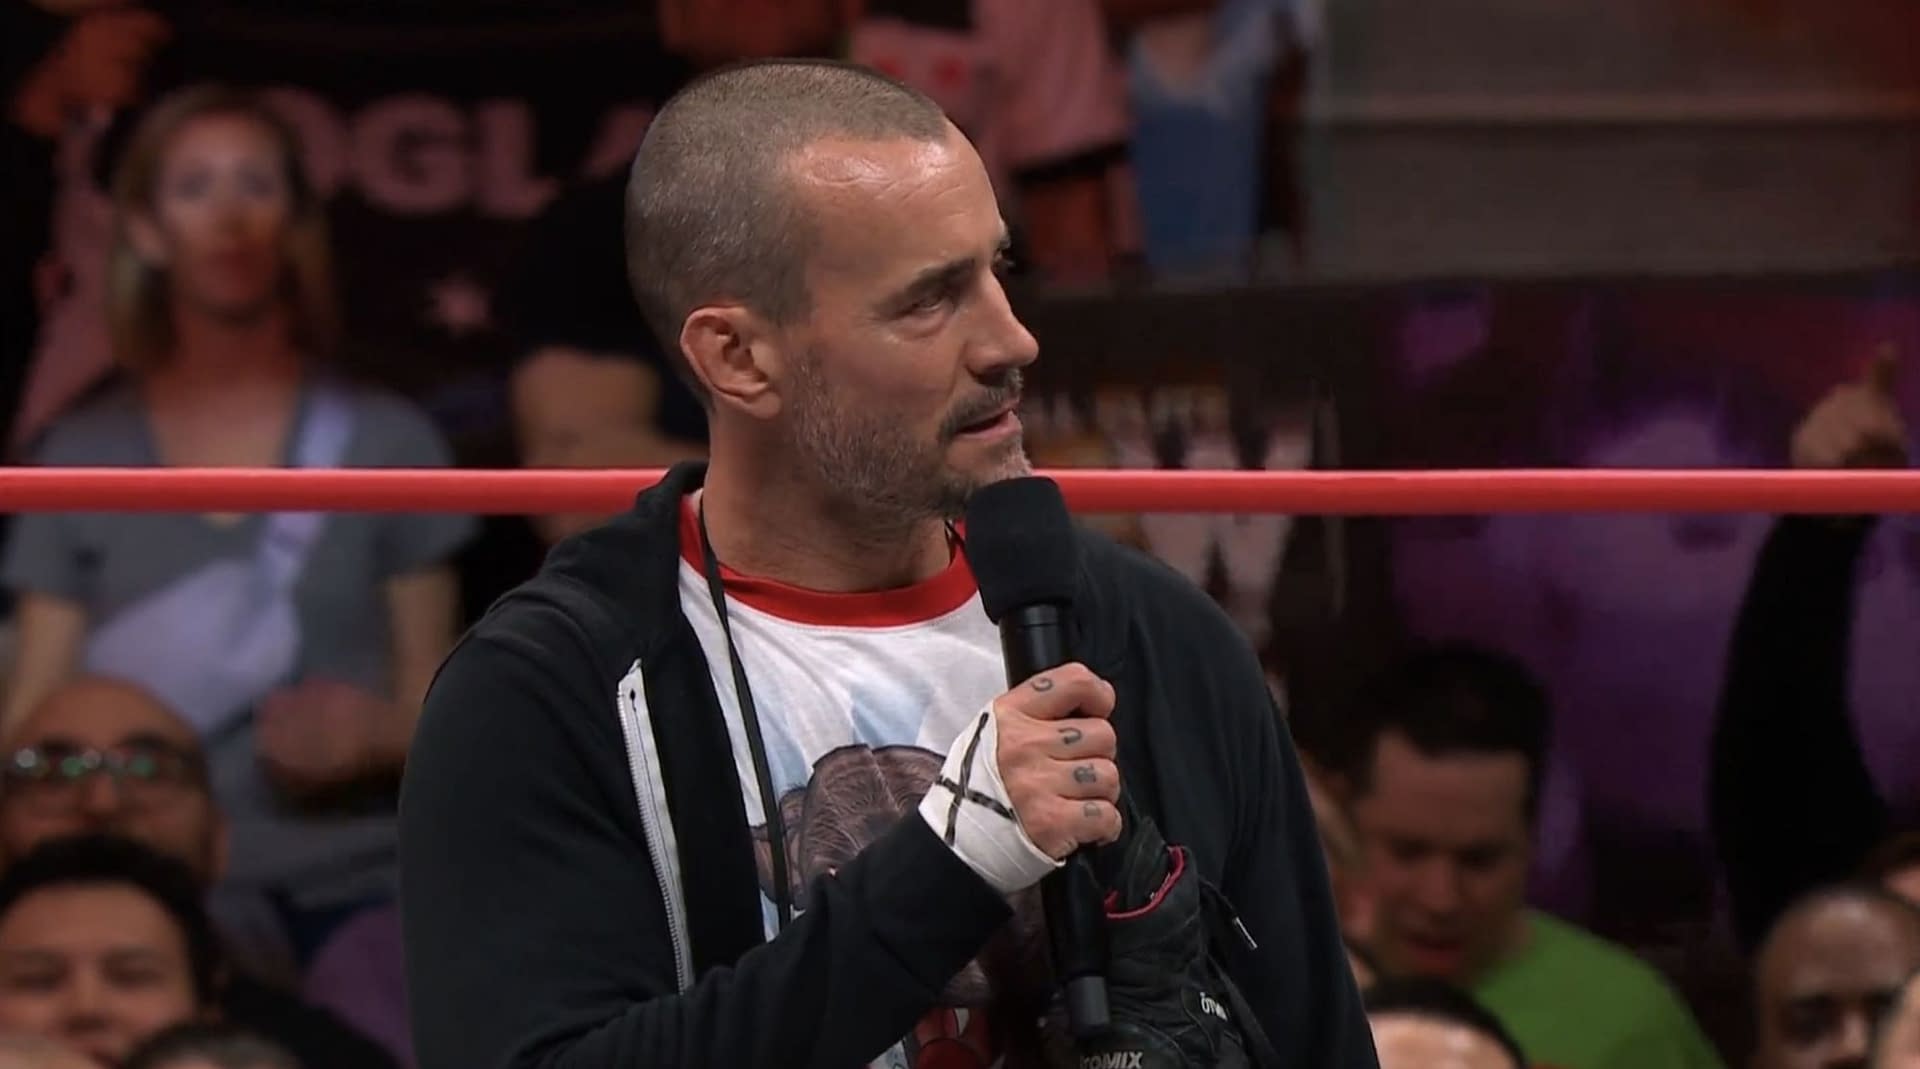 CM Punk Won't Apologize, Takes Shot at Young Bucks on AEW Collision